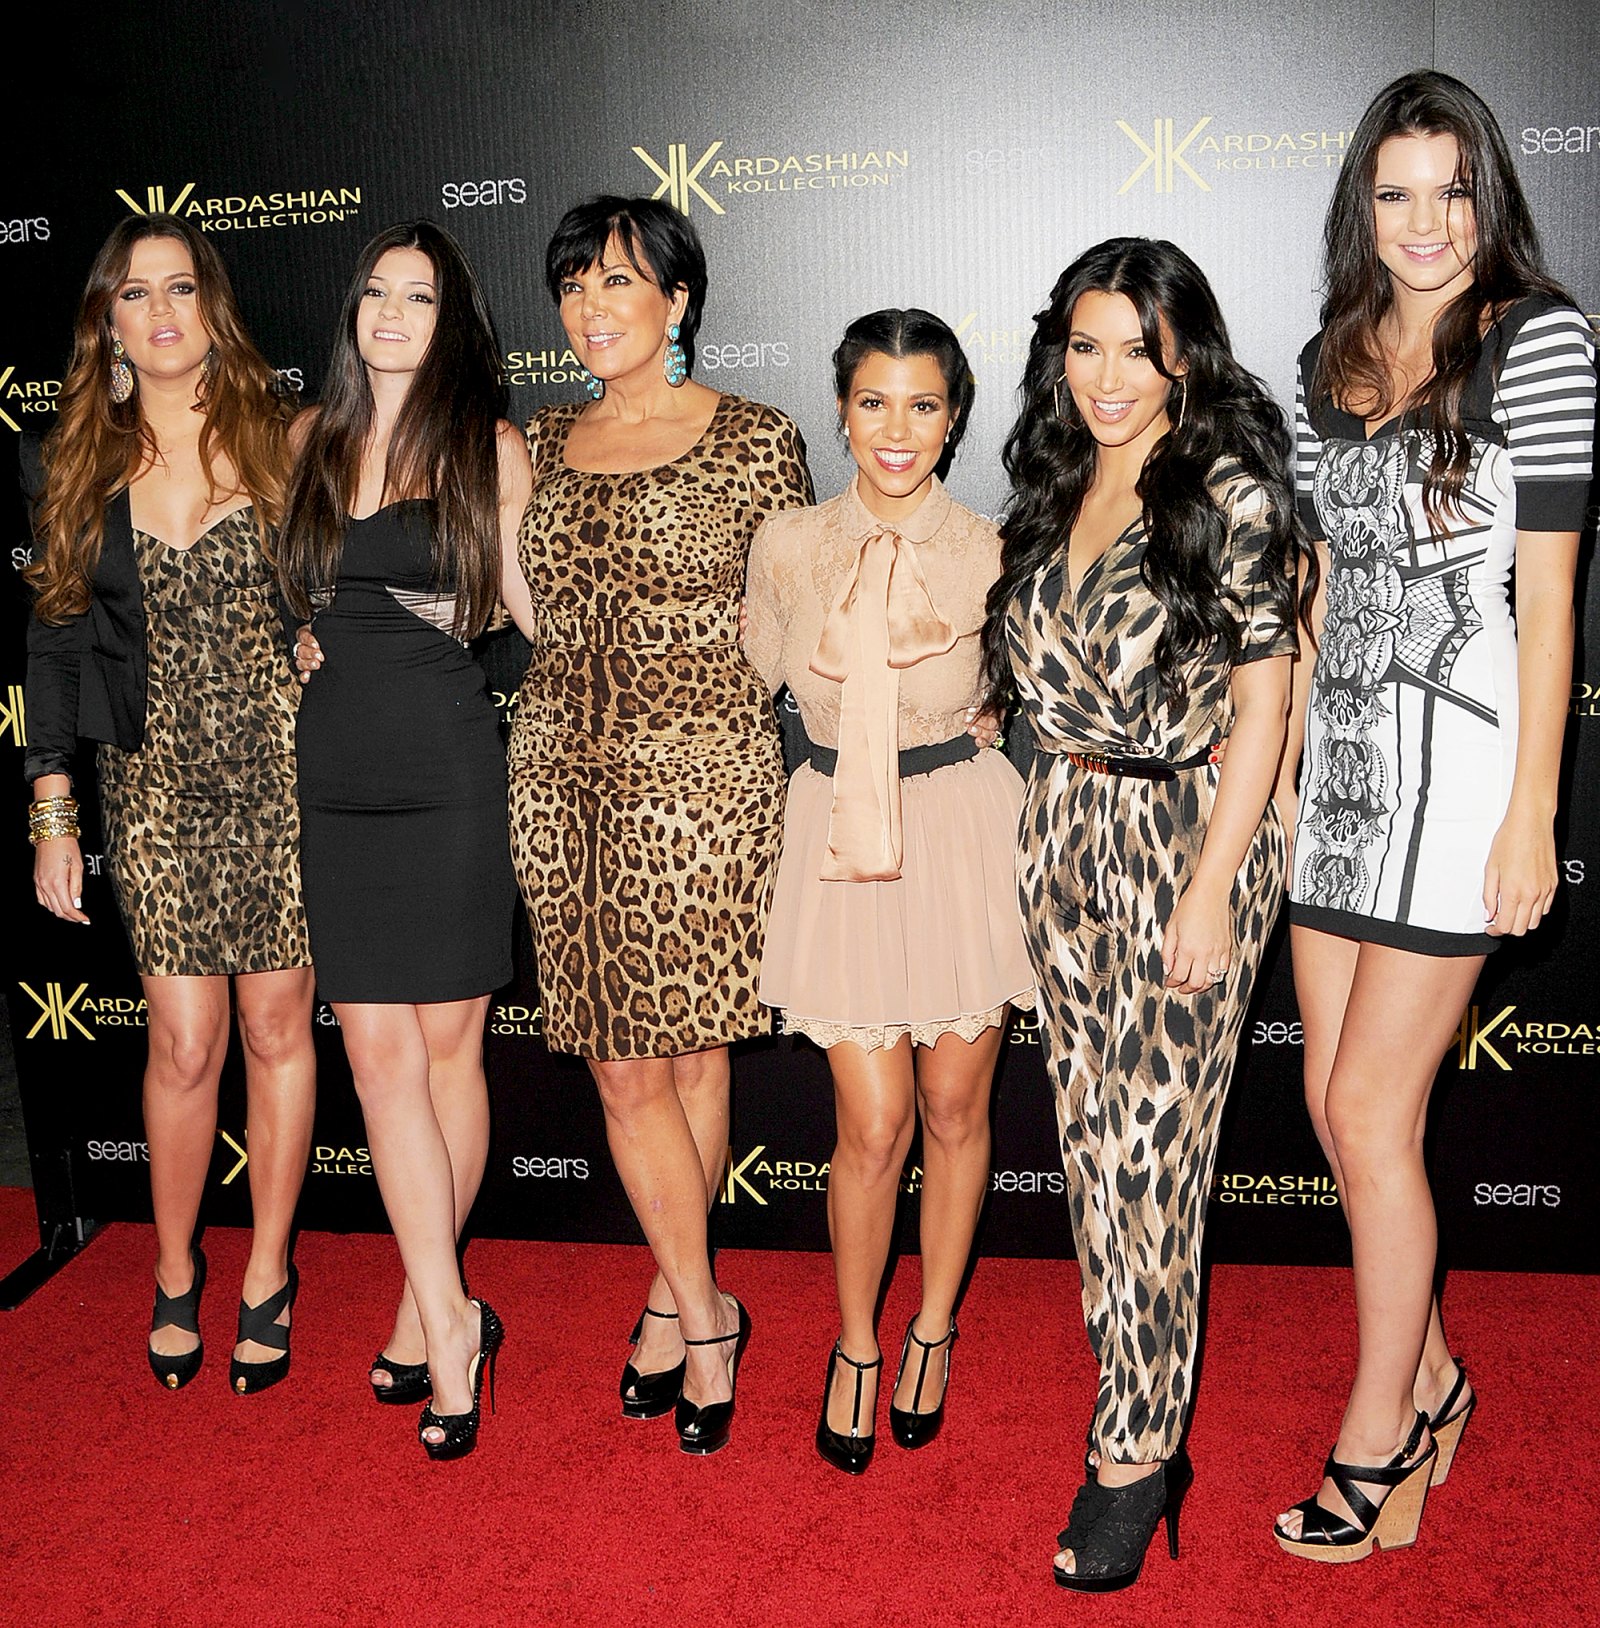 Khloe Kardasian, Kylie Jenner, Kris Kardashian, Kourtney Kardashian, Kim Kardashian and Kendall Jenner attend the Kardashian Kollection Launch Party at The Colony on August 17, 2011 in Hollywood, California.